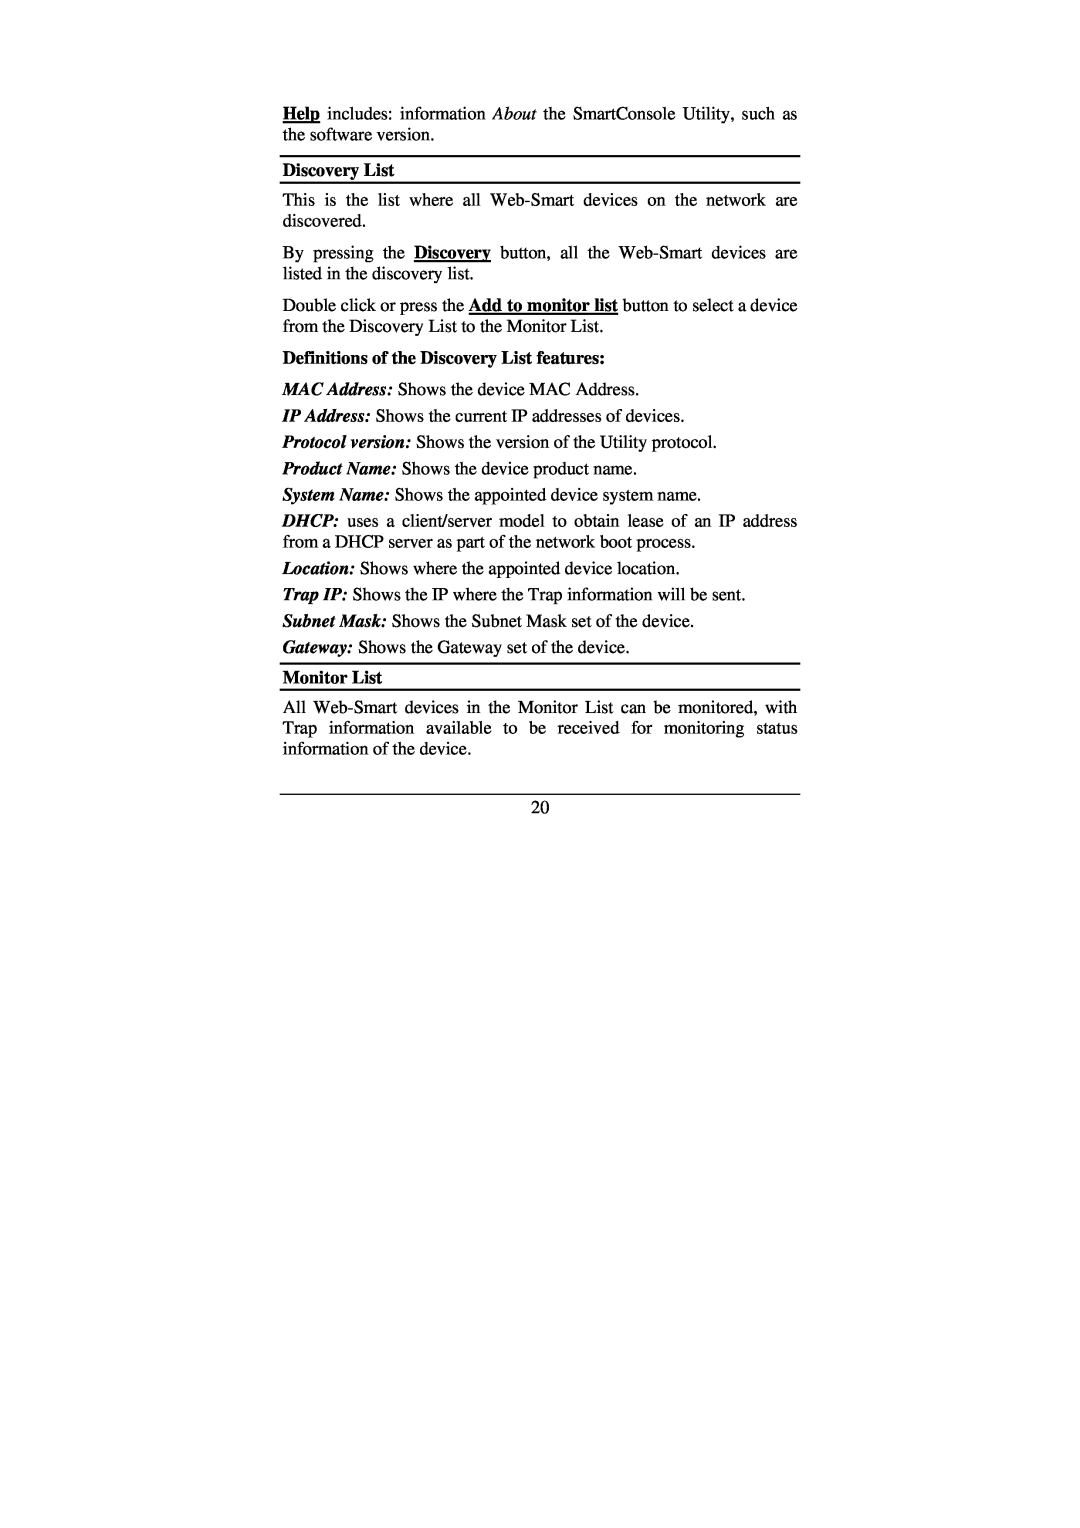 Cisco Systems DGS-1224T manual Definitions of the Discovery List features, Monitor List 